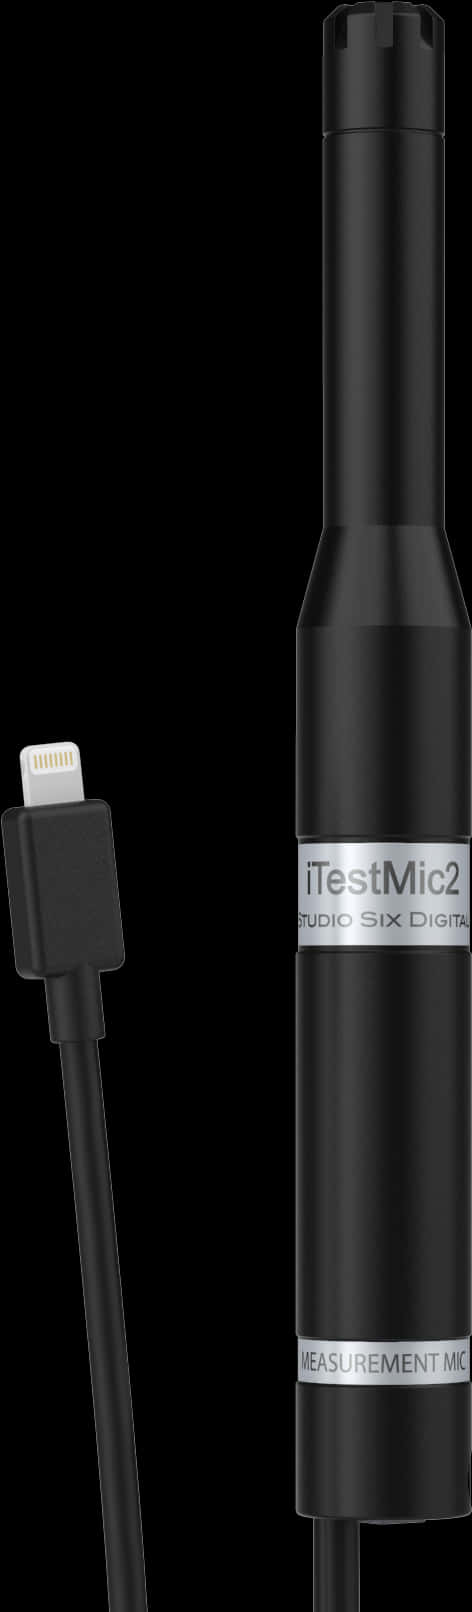 I Test Mic2 Measurement Microphonewith Lightning Connector PNG image